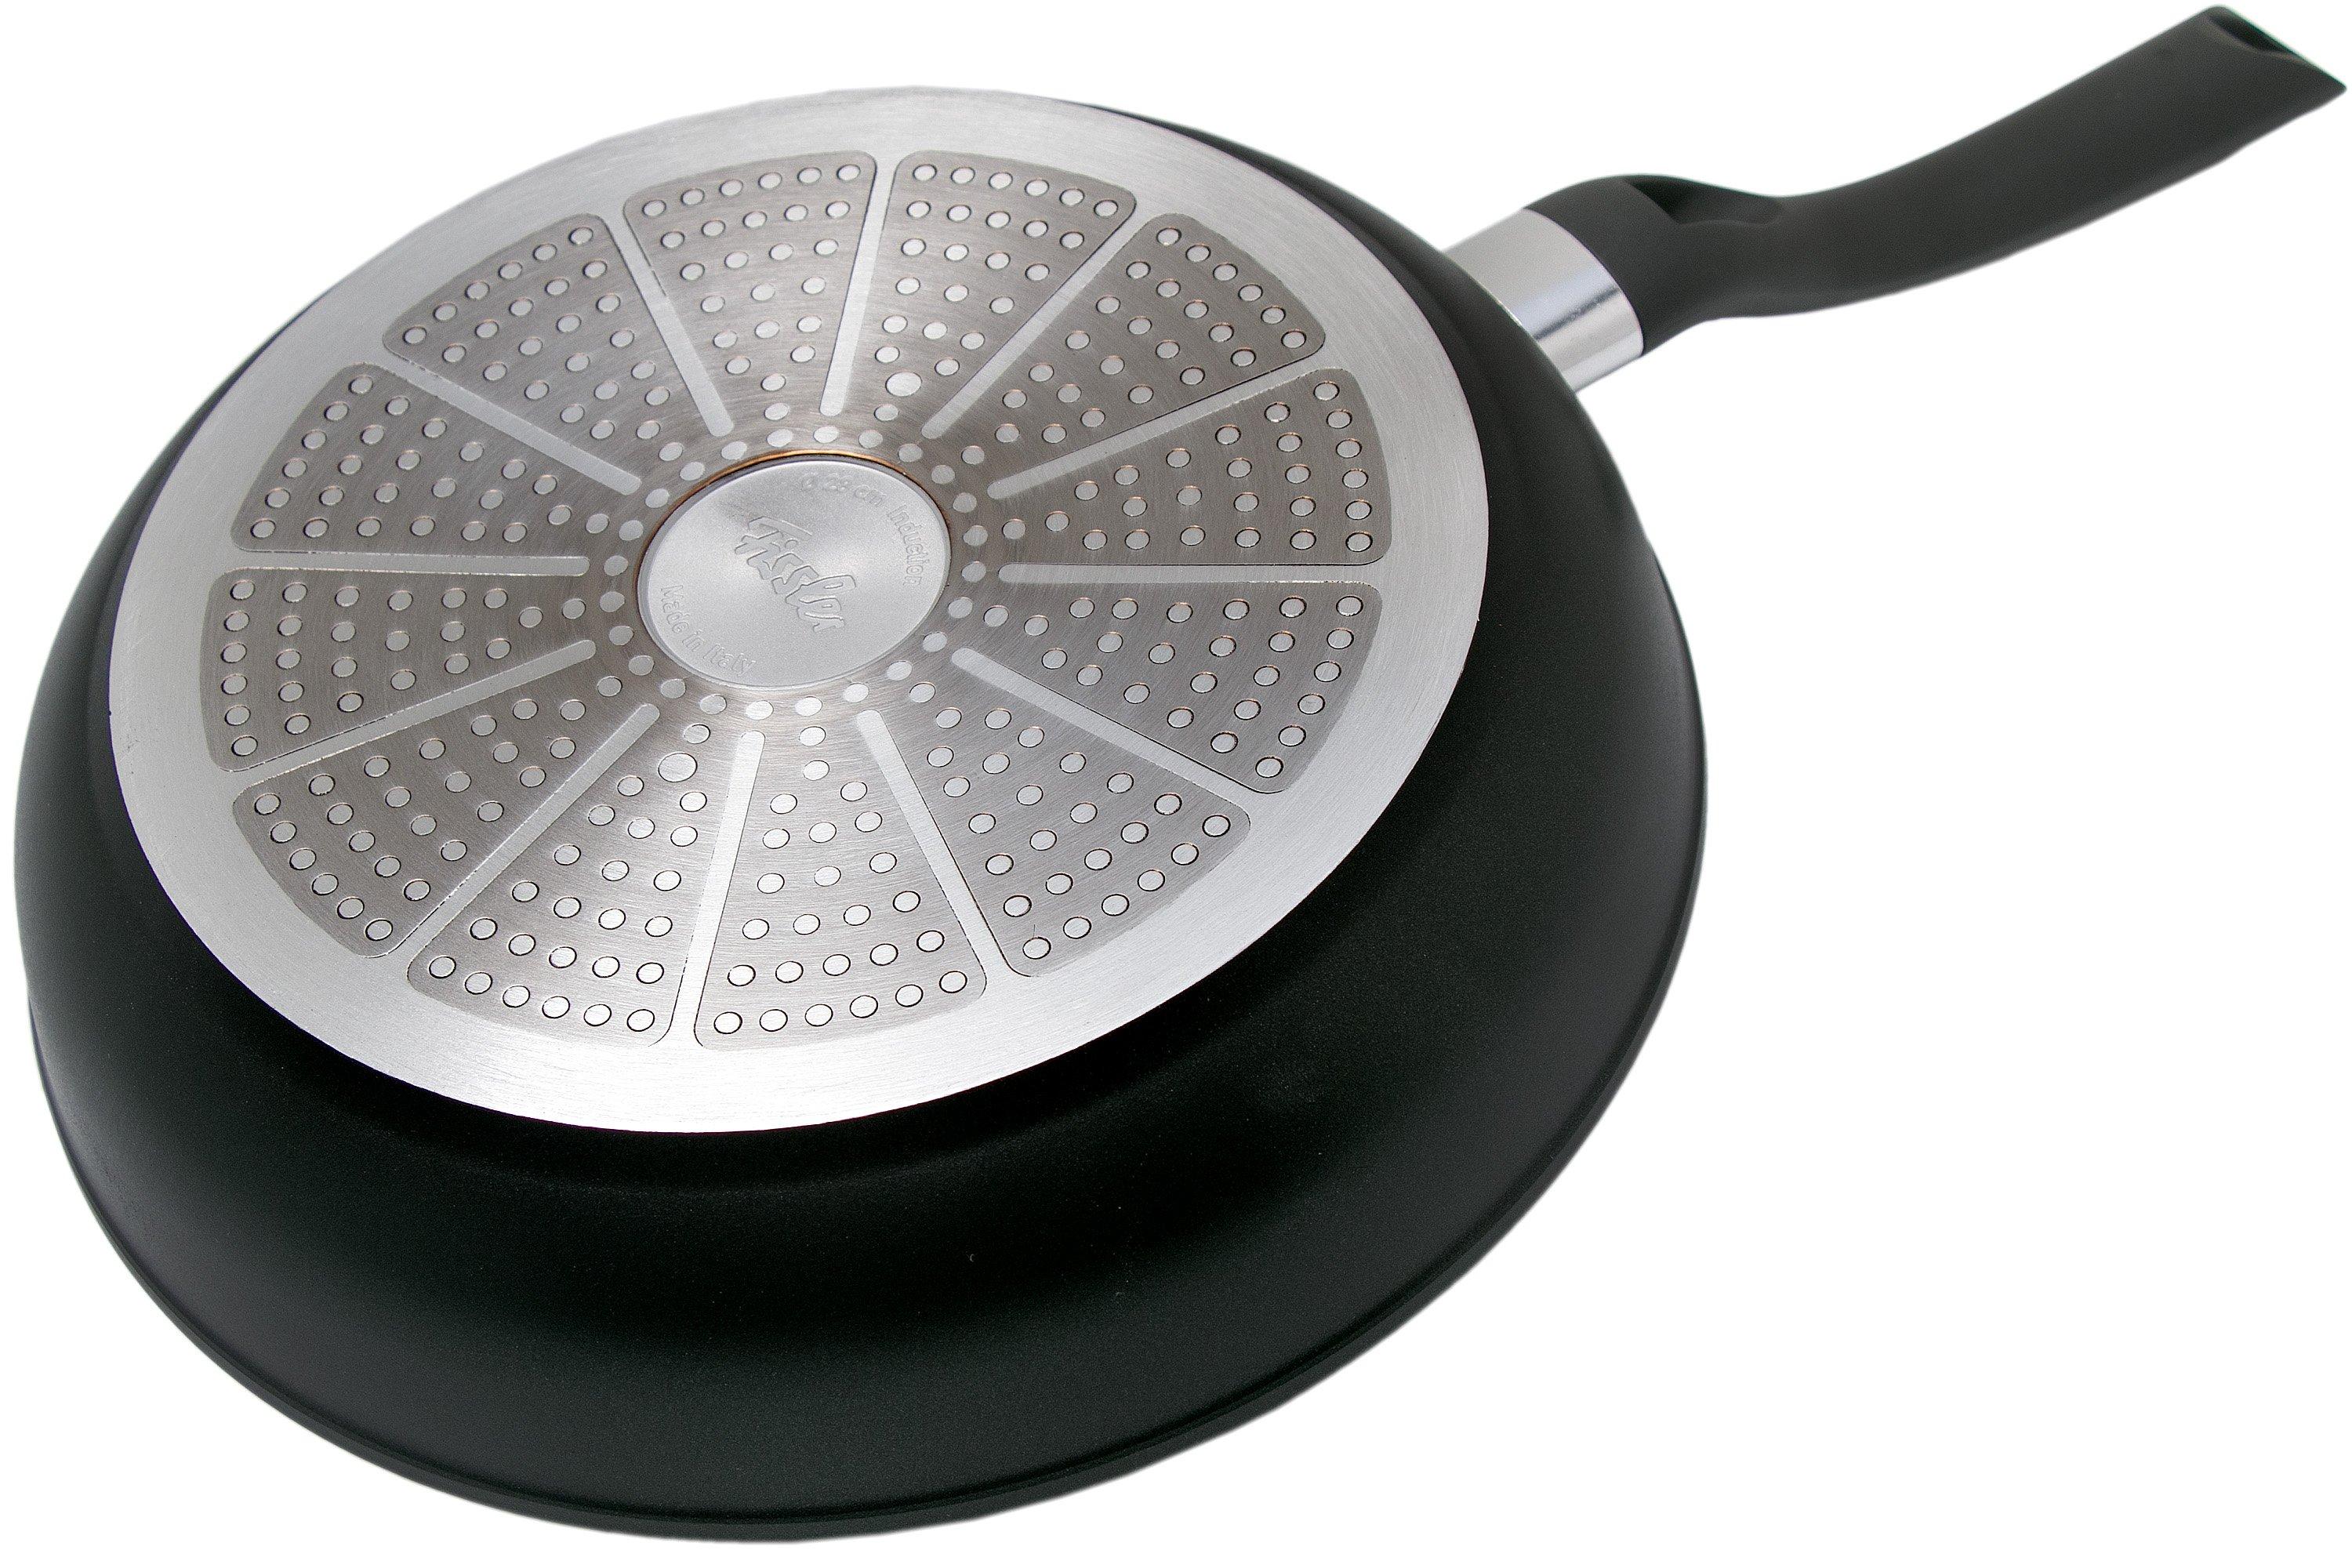 Fissler Cenit Induction 28 cm pan Advantageously at shopping 045-301-28-100, | frying